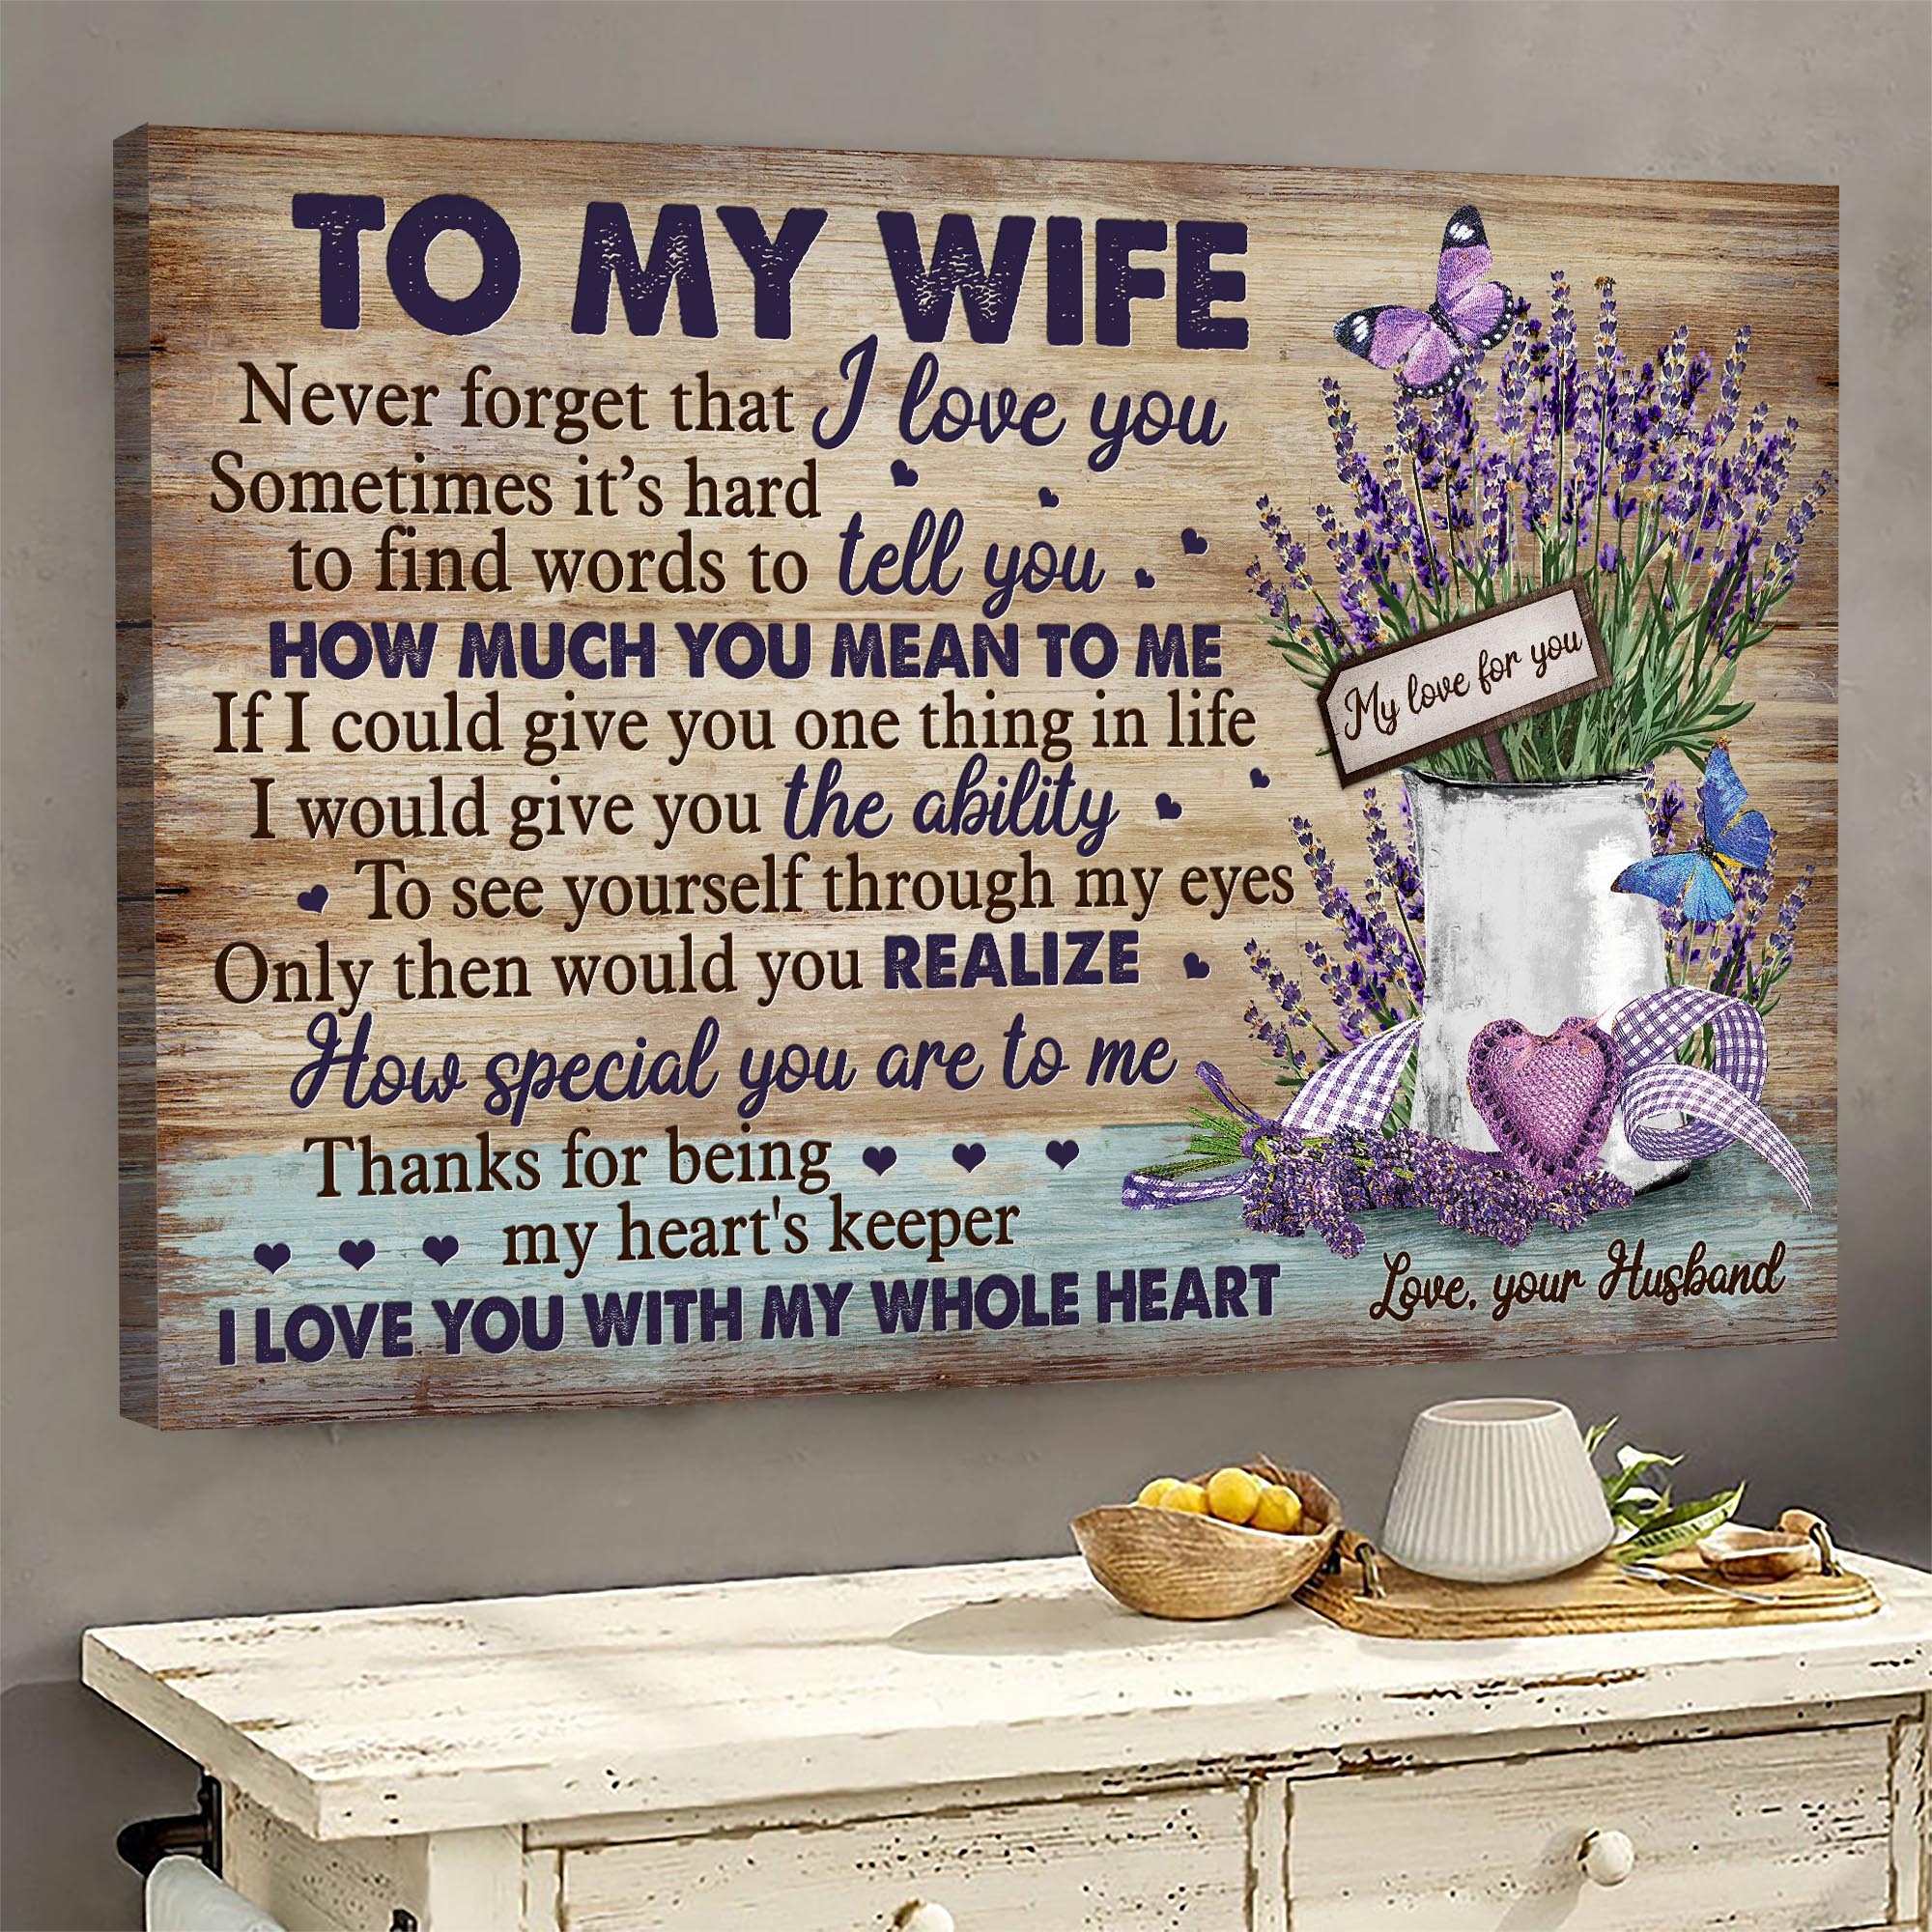 To my wife, Lavender - I love you with my whole heart Couple Landscape Canvas Prints, Wall Art